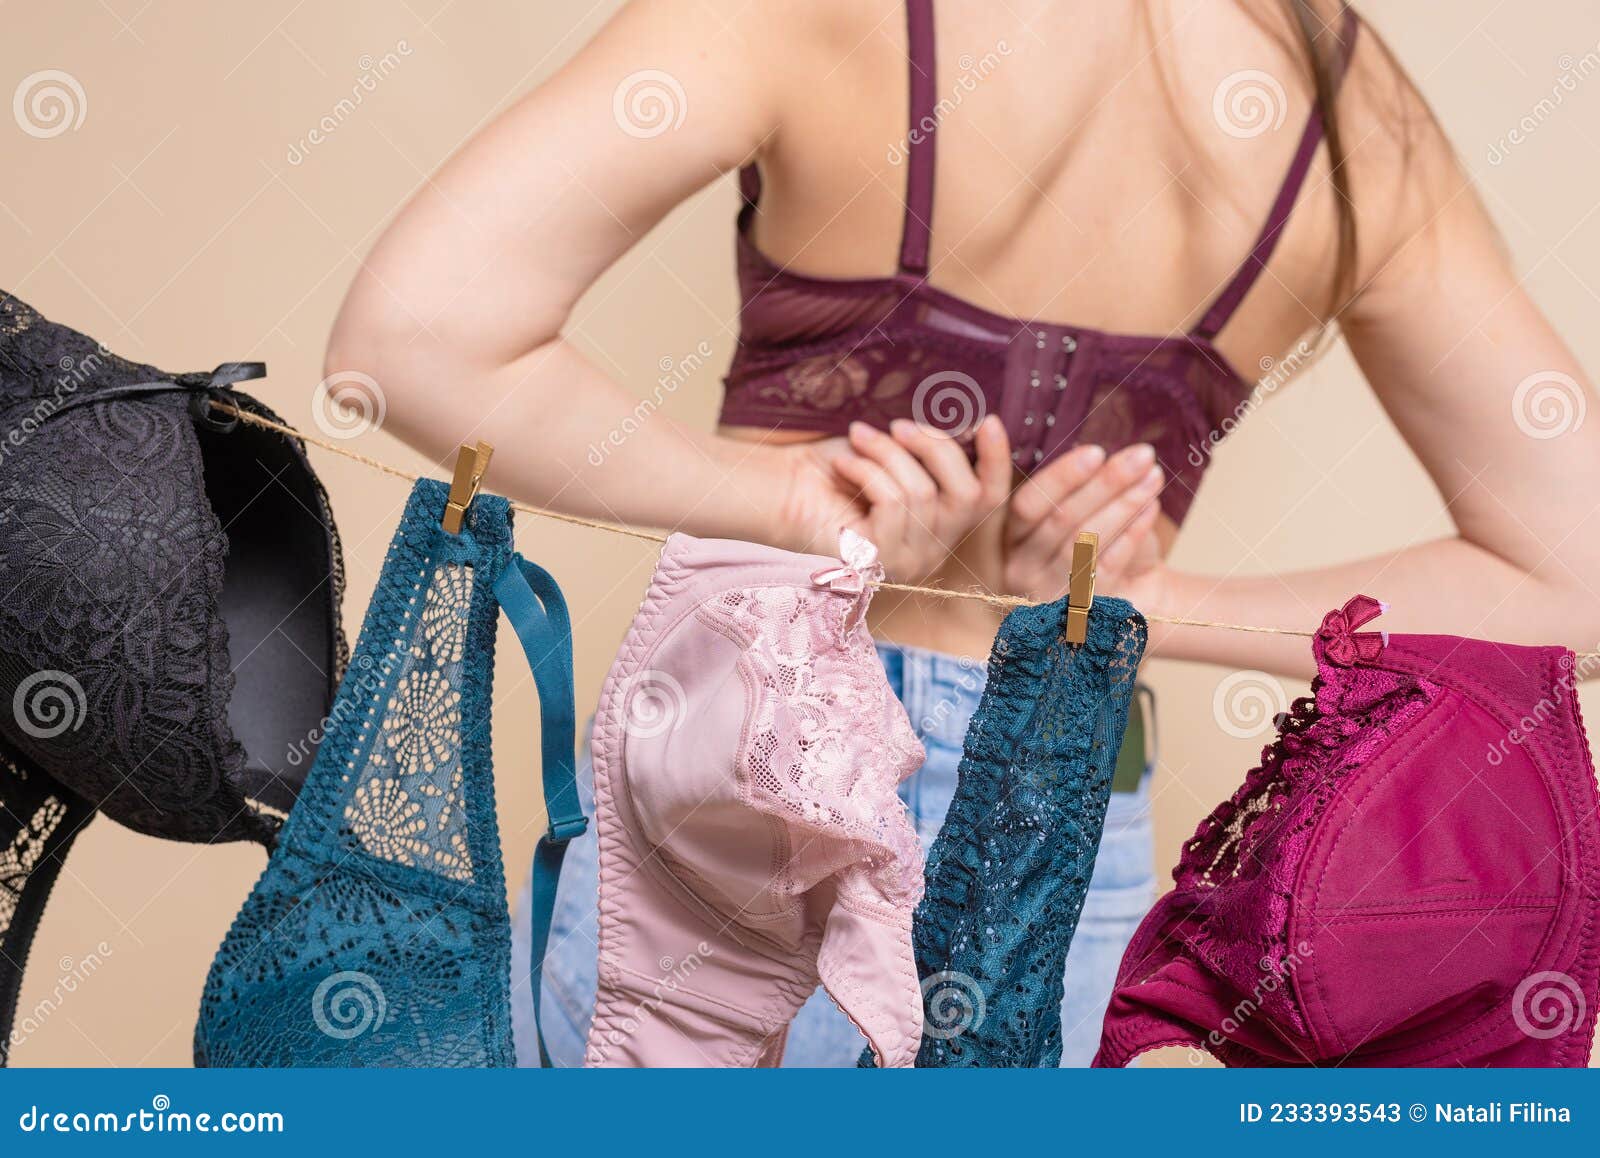 Woman Is Choosing A New Panties In The Fitting Room Concept. Stock Photo,  Picture and Royalty Free Image. Image 154087951.